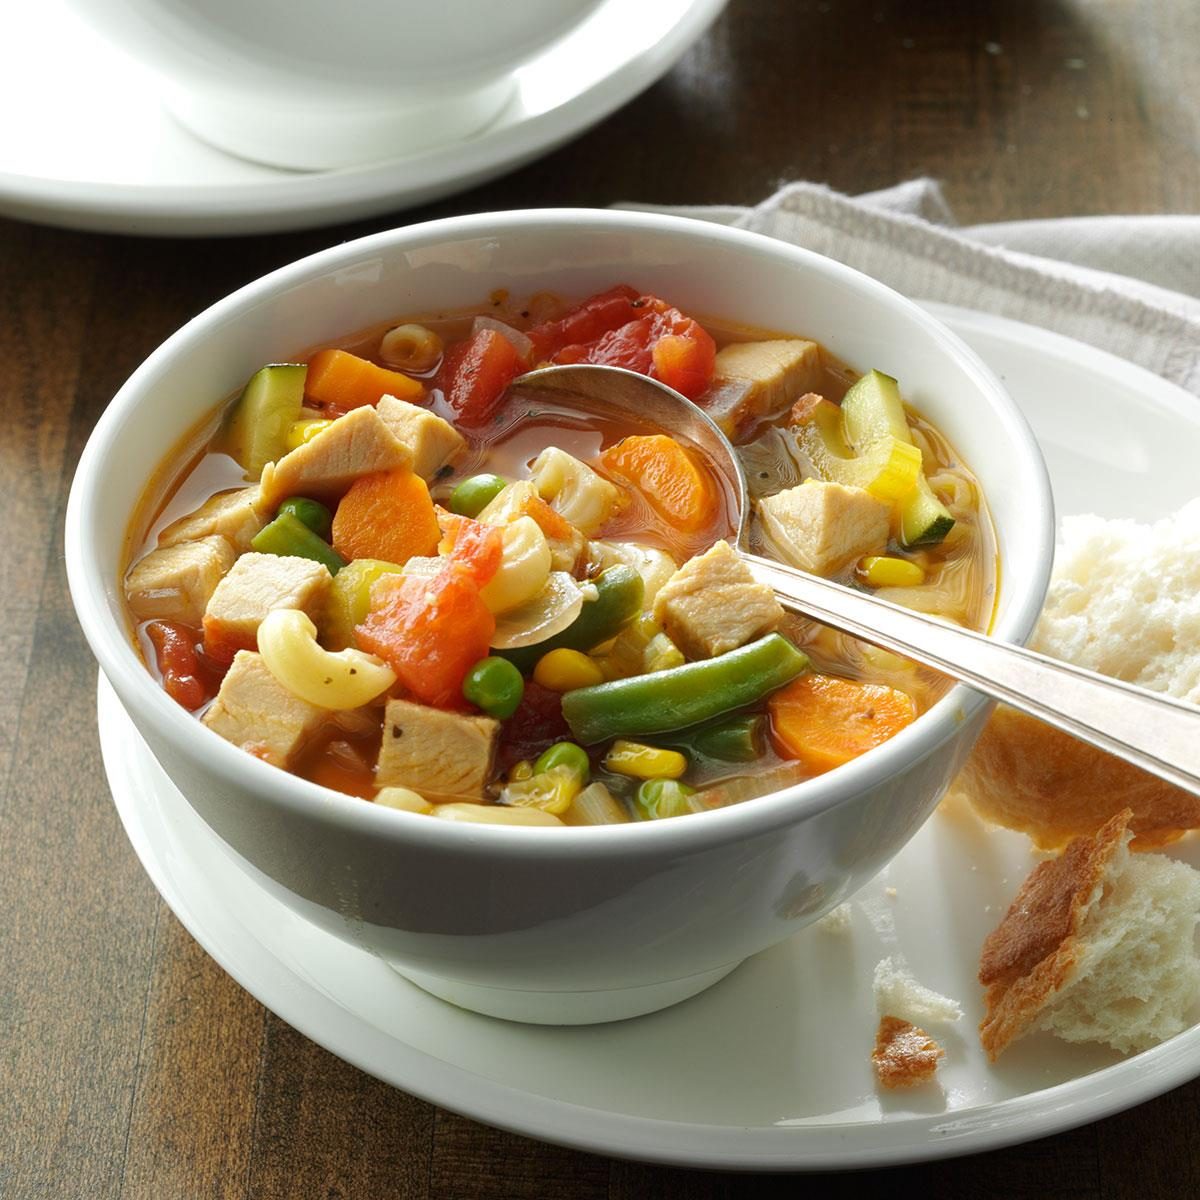 https://www.tasteofhome.com/wp-content/uploads/2018/01/Minestrone-with-Turkey_exps39085_SD132779D06_05_3bC_RMS-3.jpg?fit=700%2C1024